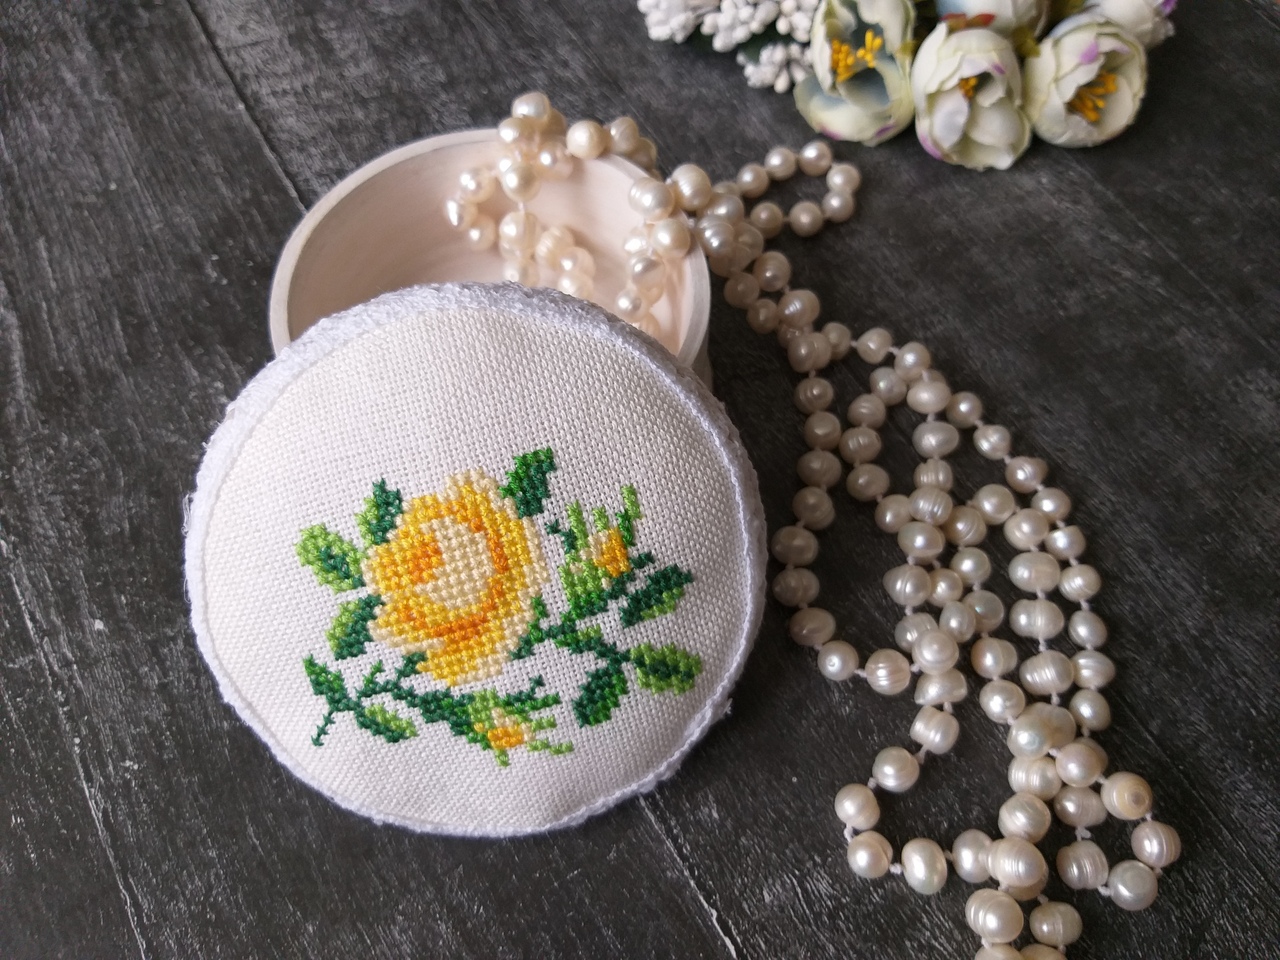 Cross Stitch Kits For Adults,Beginner Embroidery Kits Yellow Daisy